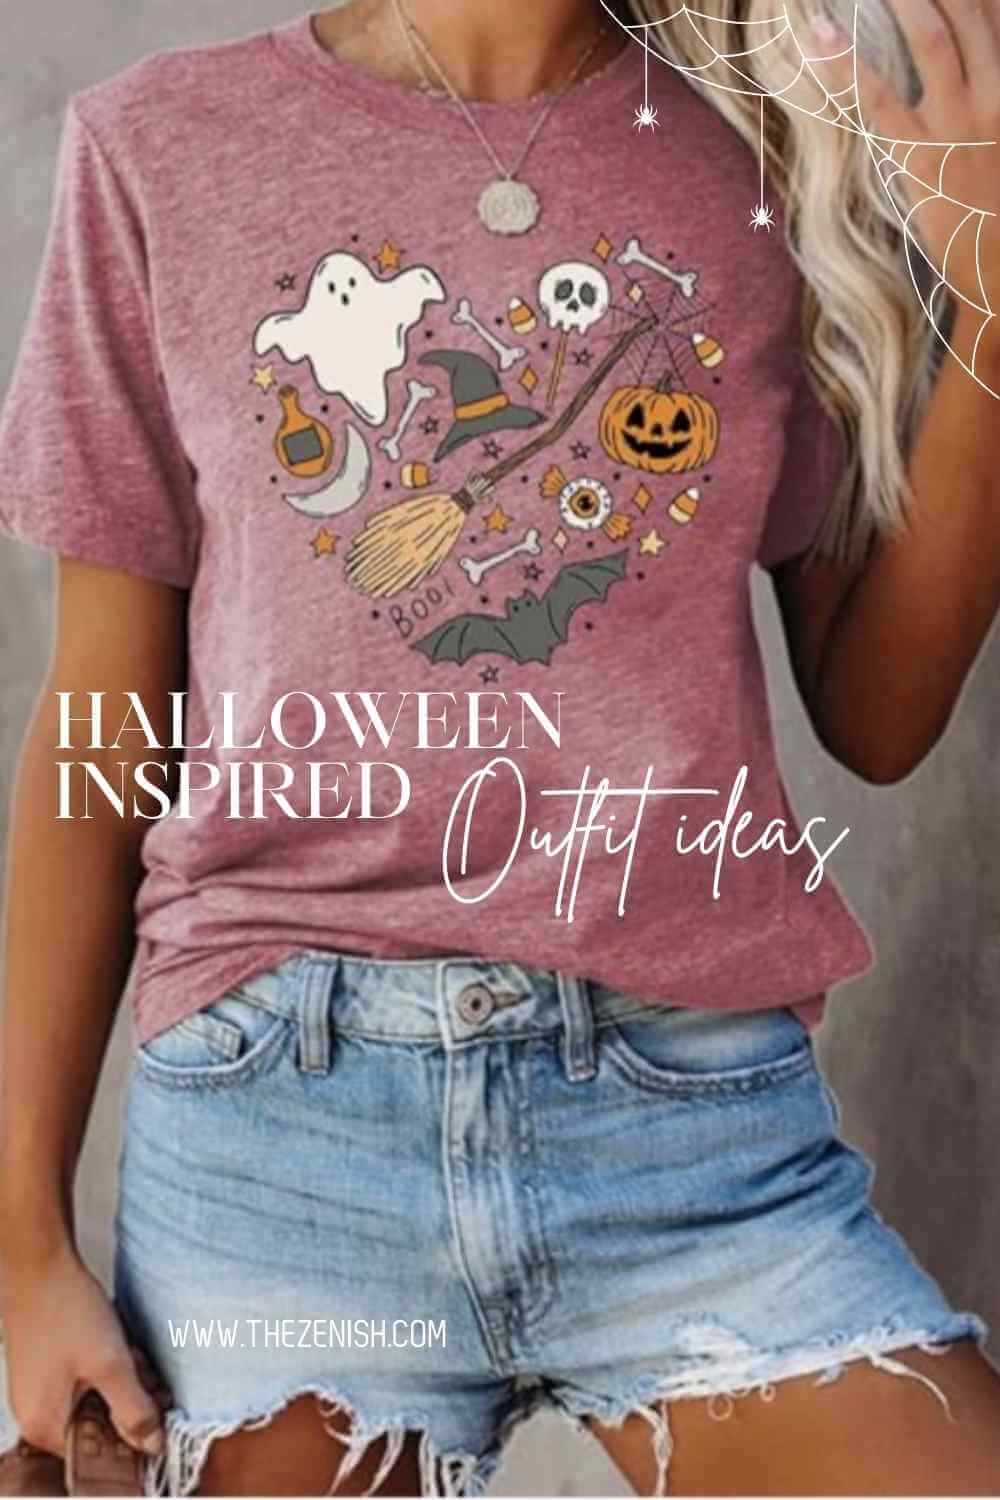 13 Spooktacular Halloween Inspired Outfit Ideas 12 13 Spooktacular Halloween Inspired Outfit Ideas